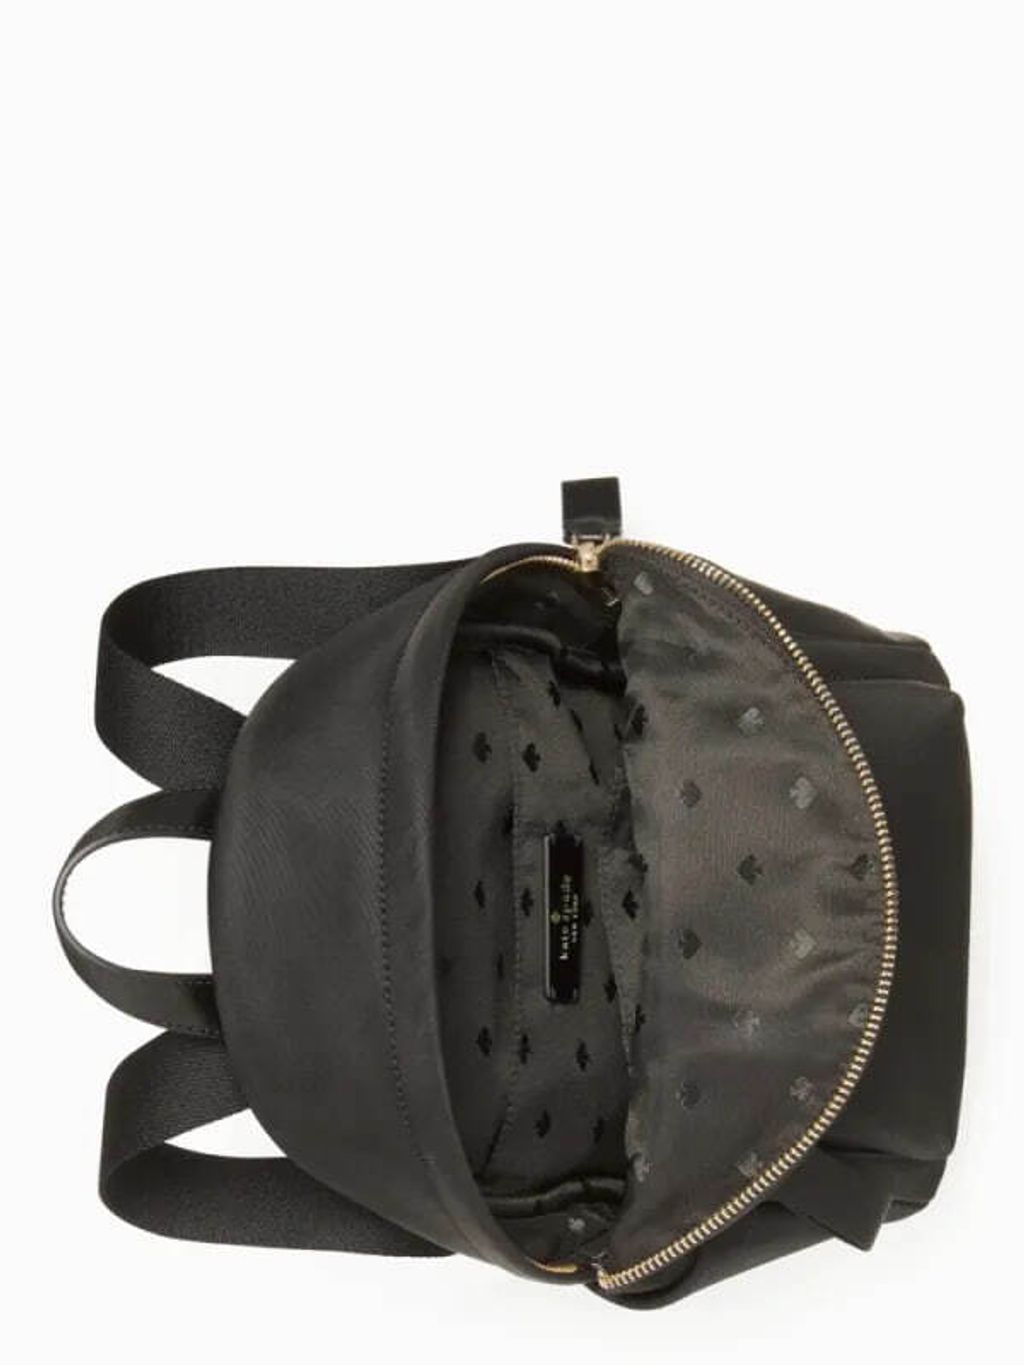 handbagbranded.com getlush outlet personalshopper usa malaysia ready stock Coach Malaysia Kate Spade Chelsea Nylon Large Backpack in Black 3